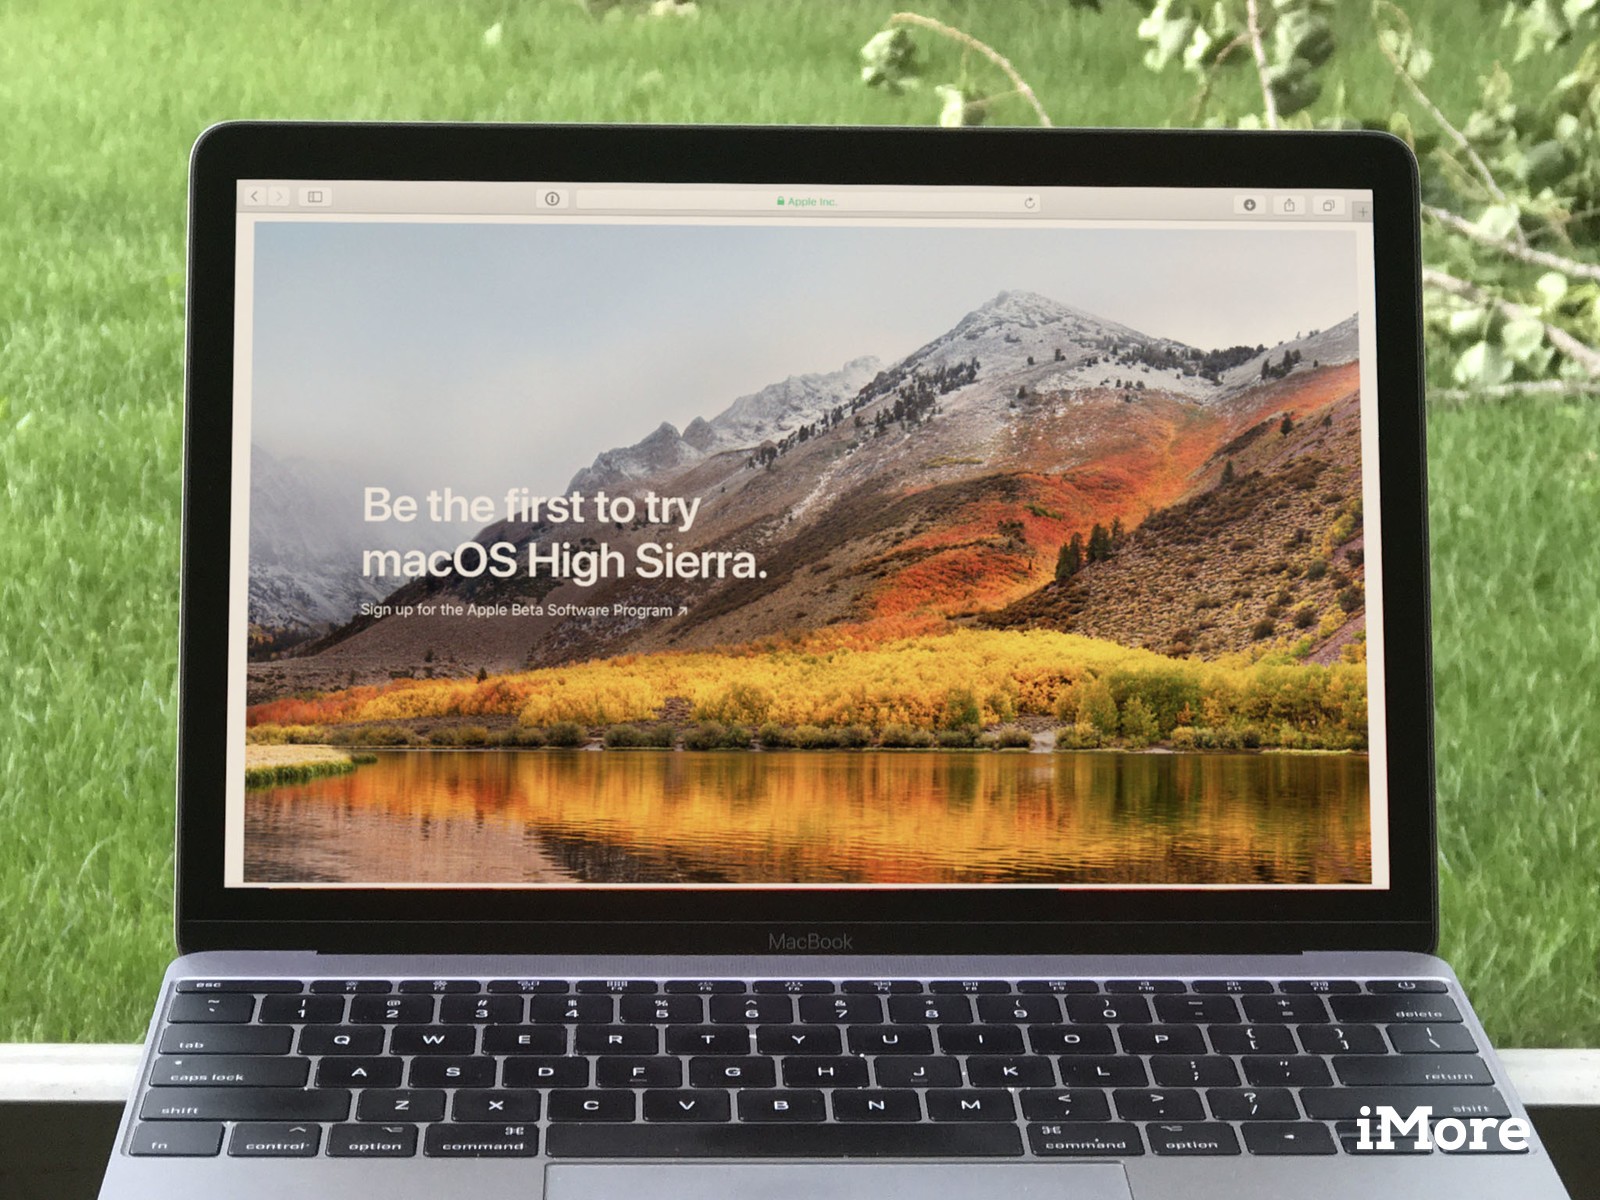 High Sierra download the last version for android